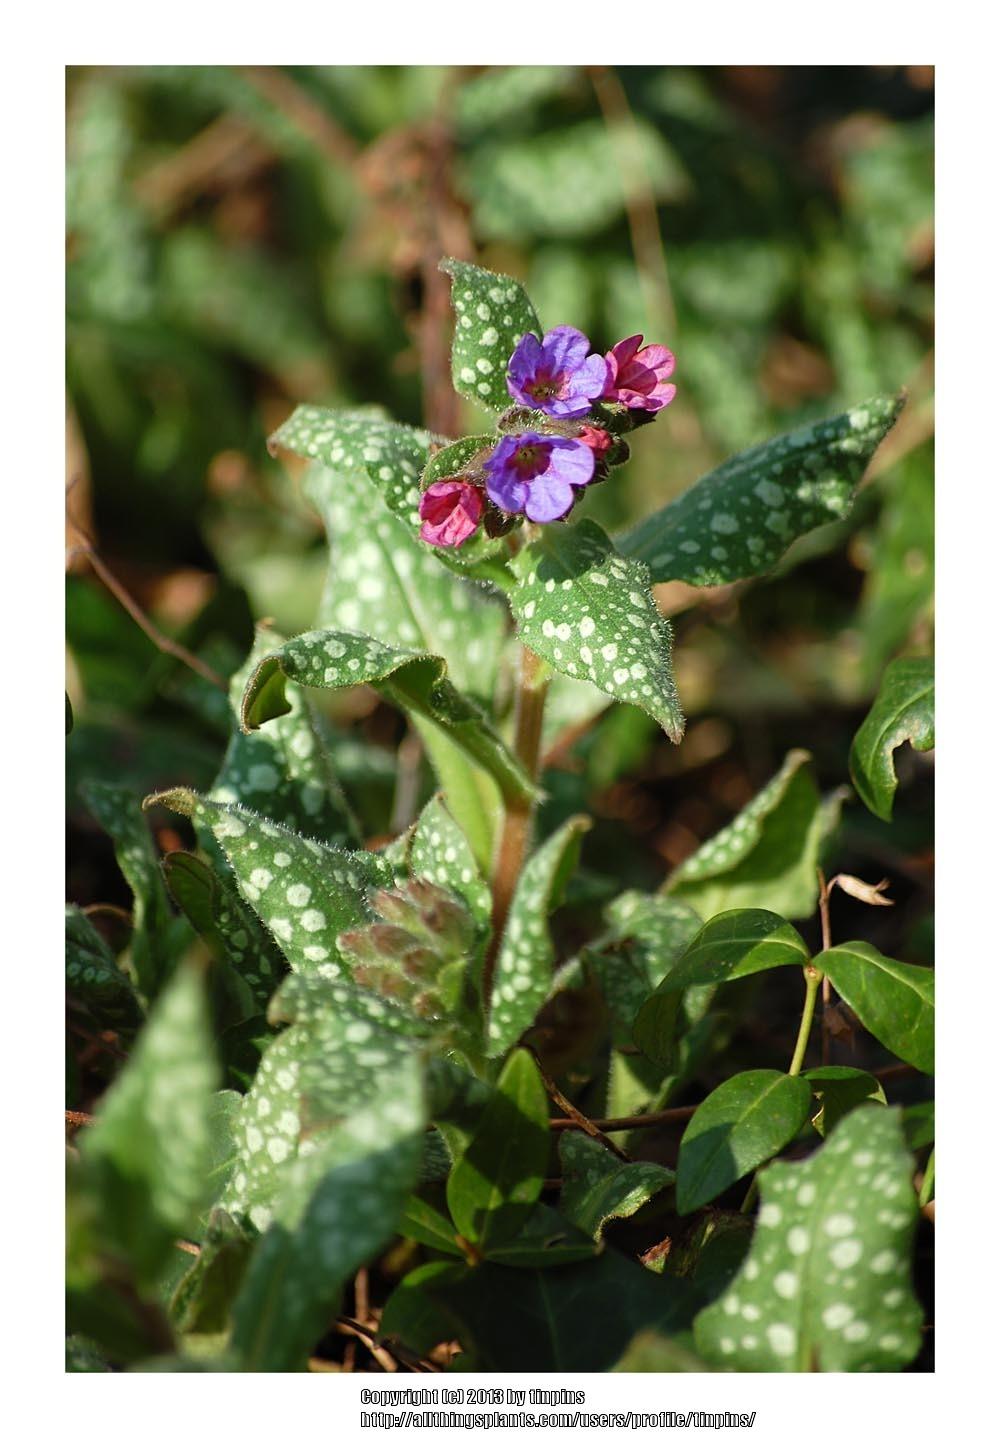 Photo of Soldiers and Sailors (Pulmonaria officinalis) uploaded by tinpins